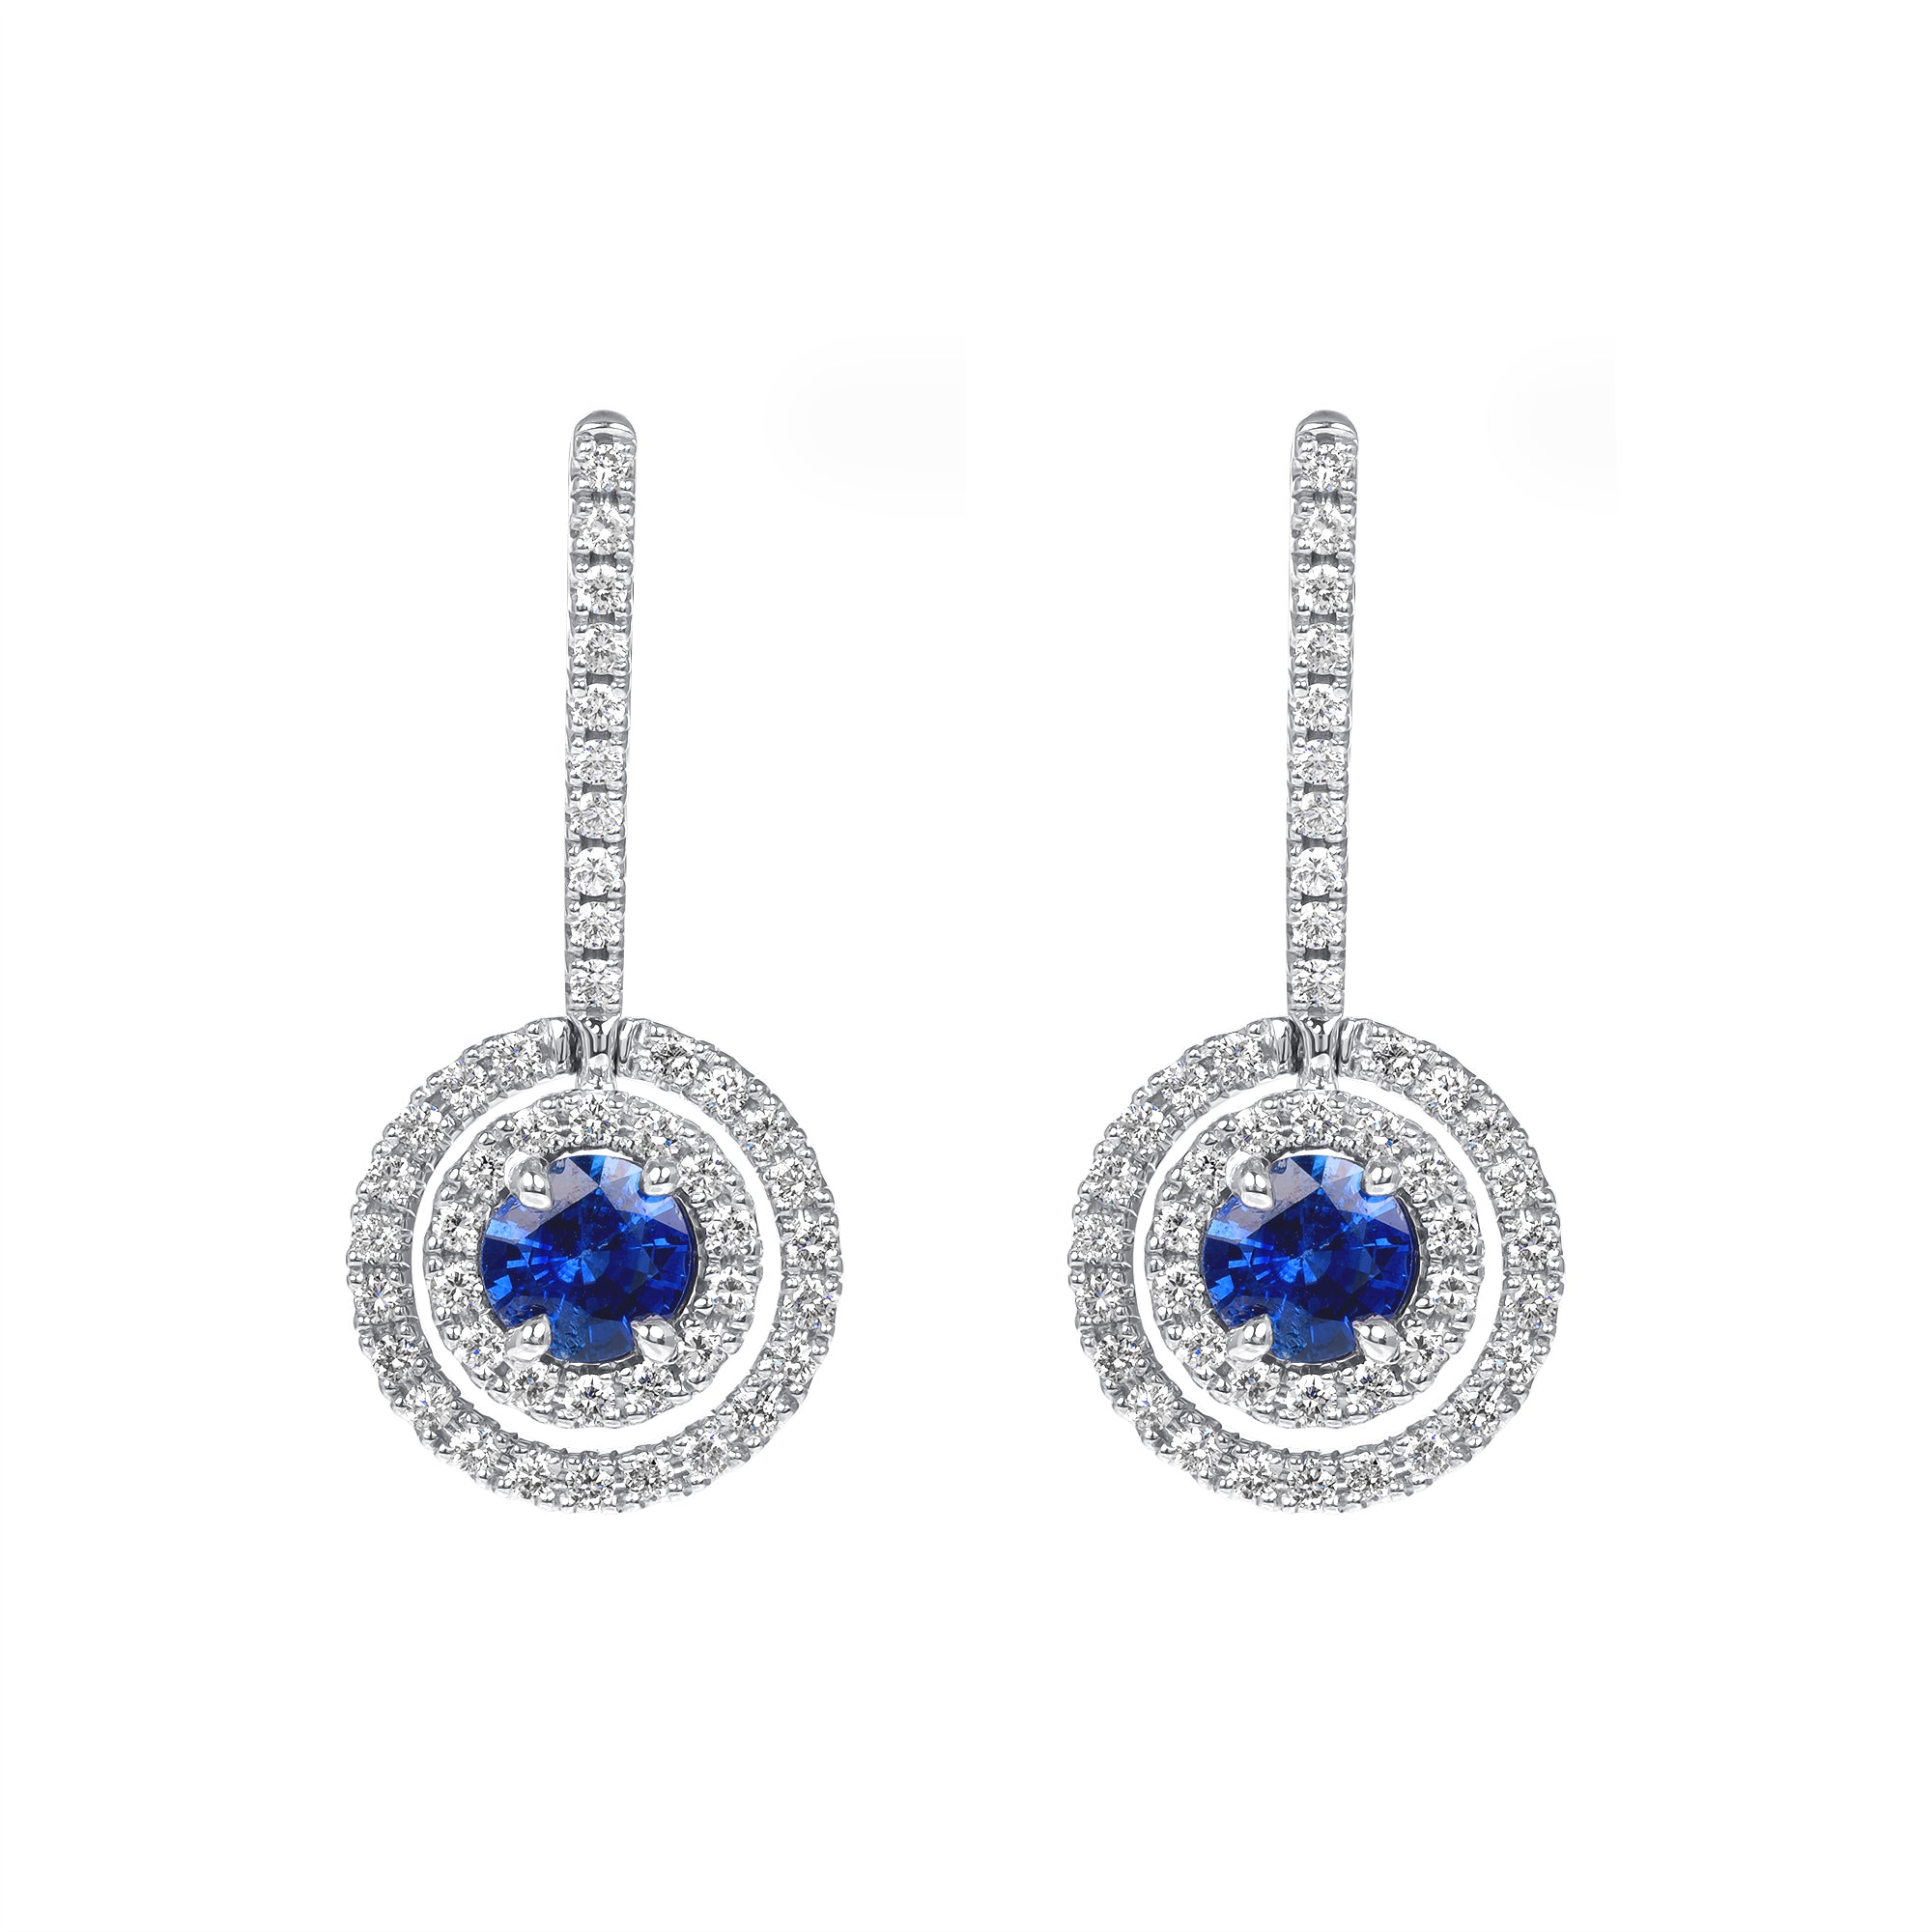 Round Brilliant Sapphire Center Stone and Diamond Leverback Earrings in 18K White Gold